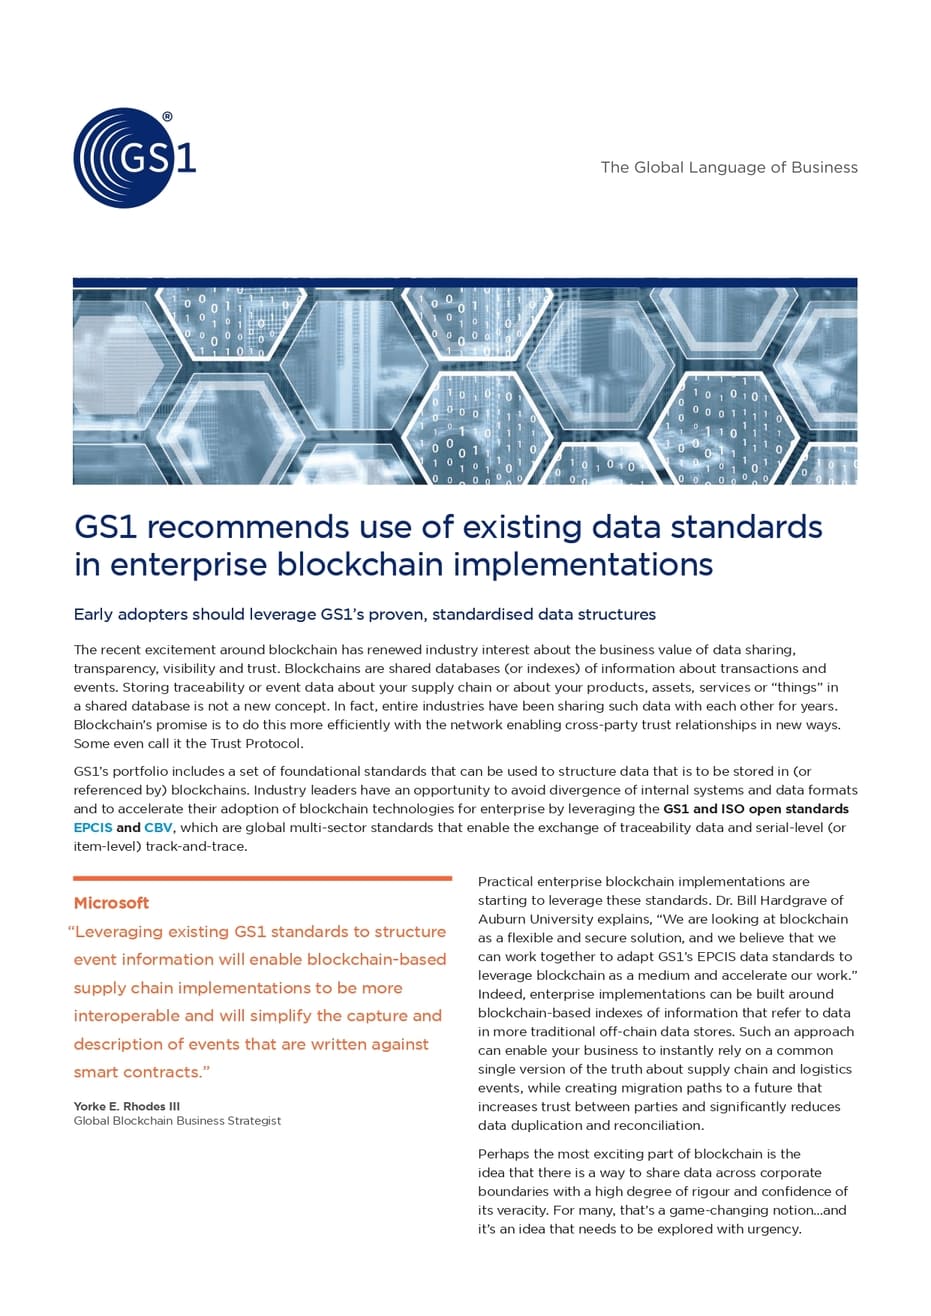 GS1 standards are foundational to blockchain implementations